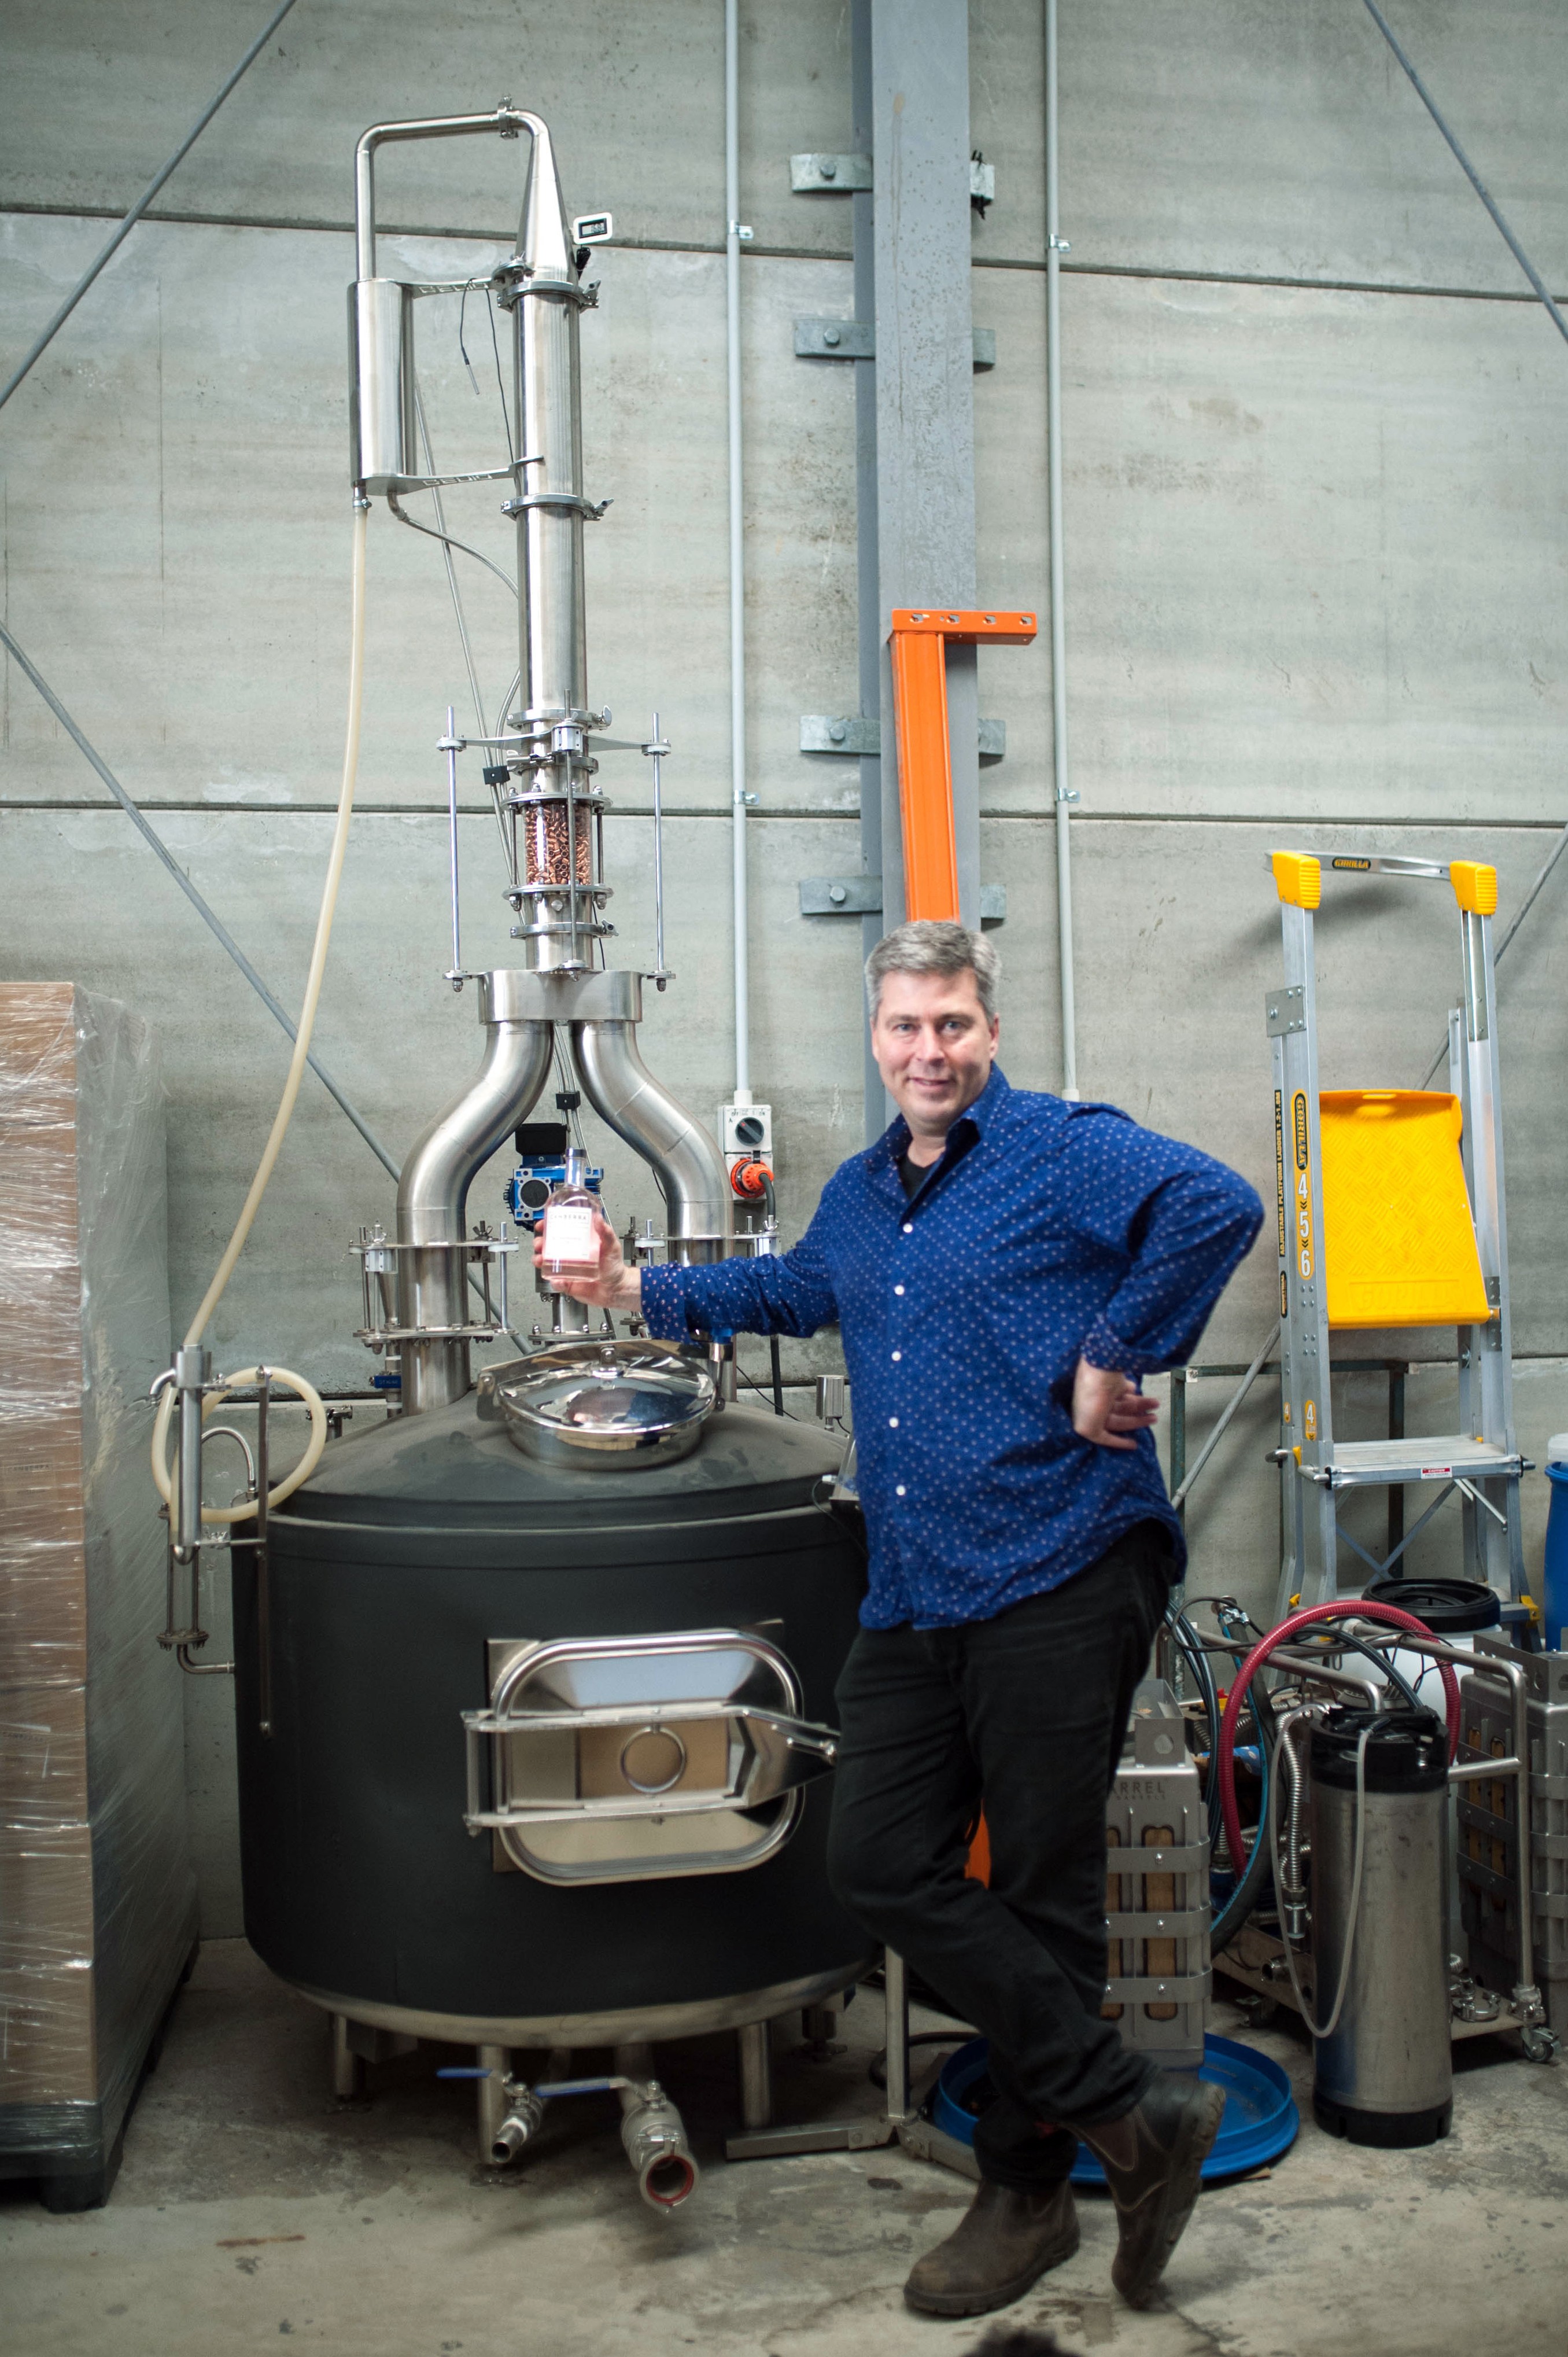 Tim Reardon's distilling GINious is going places